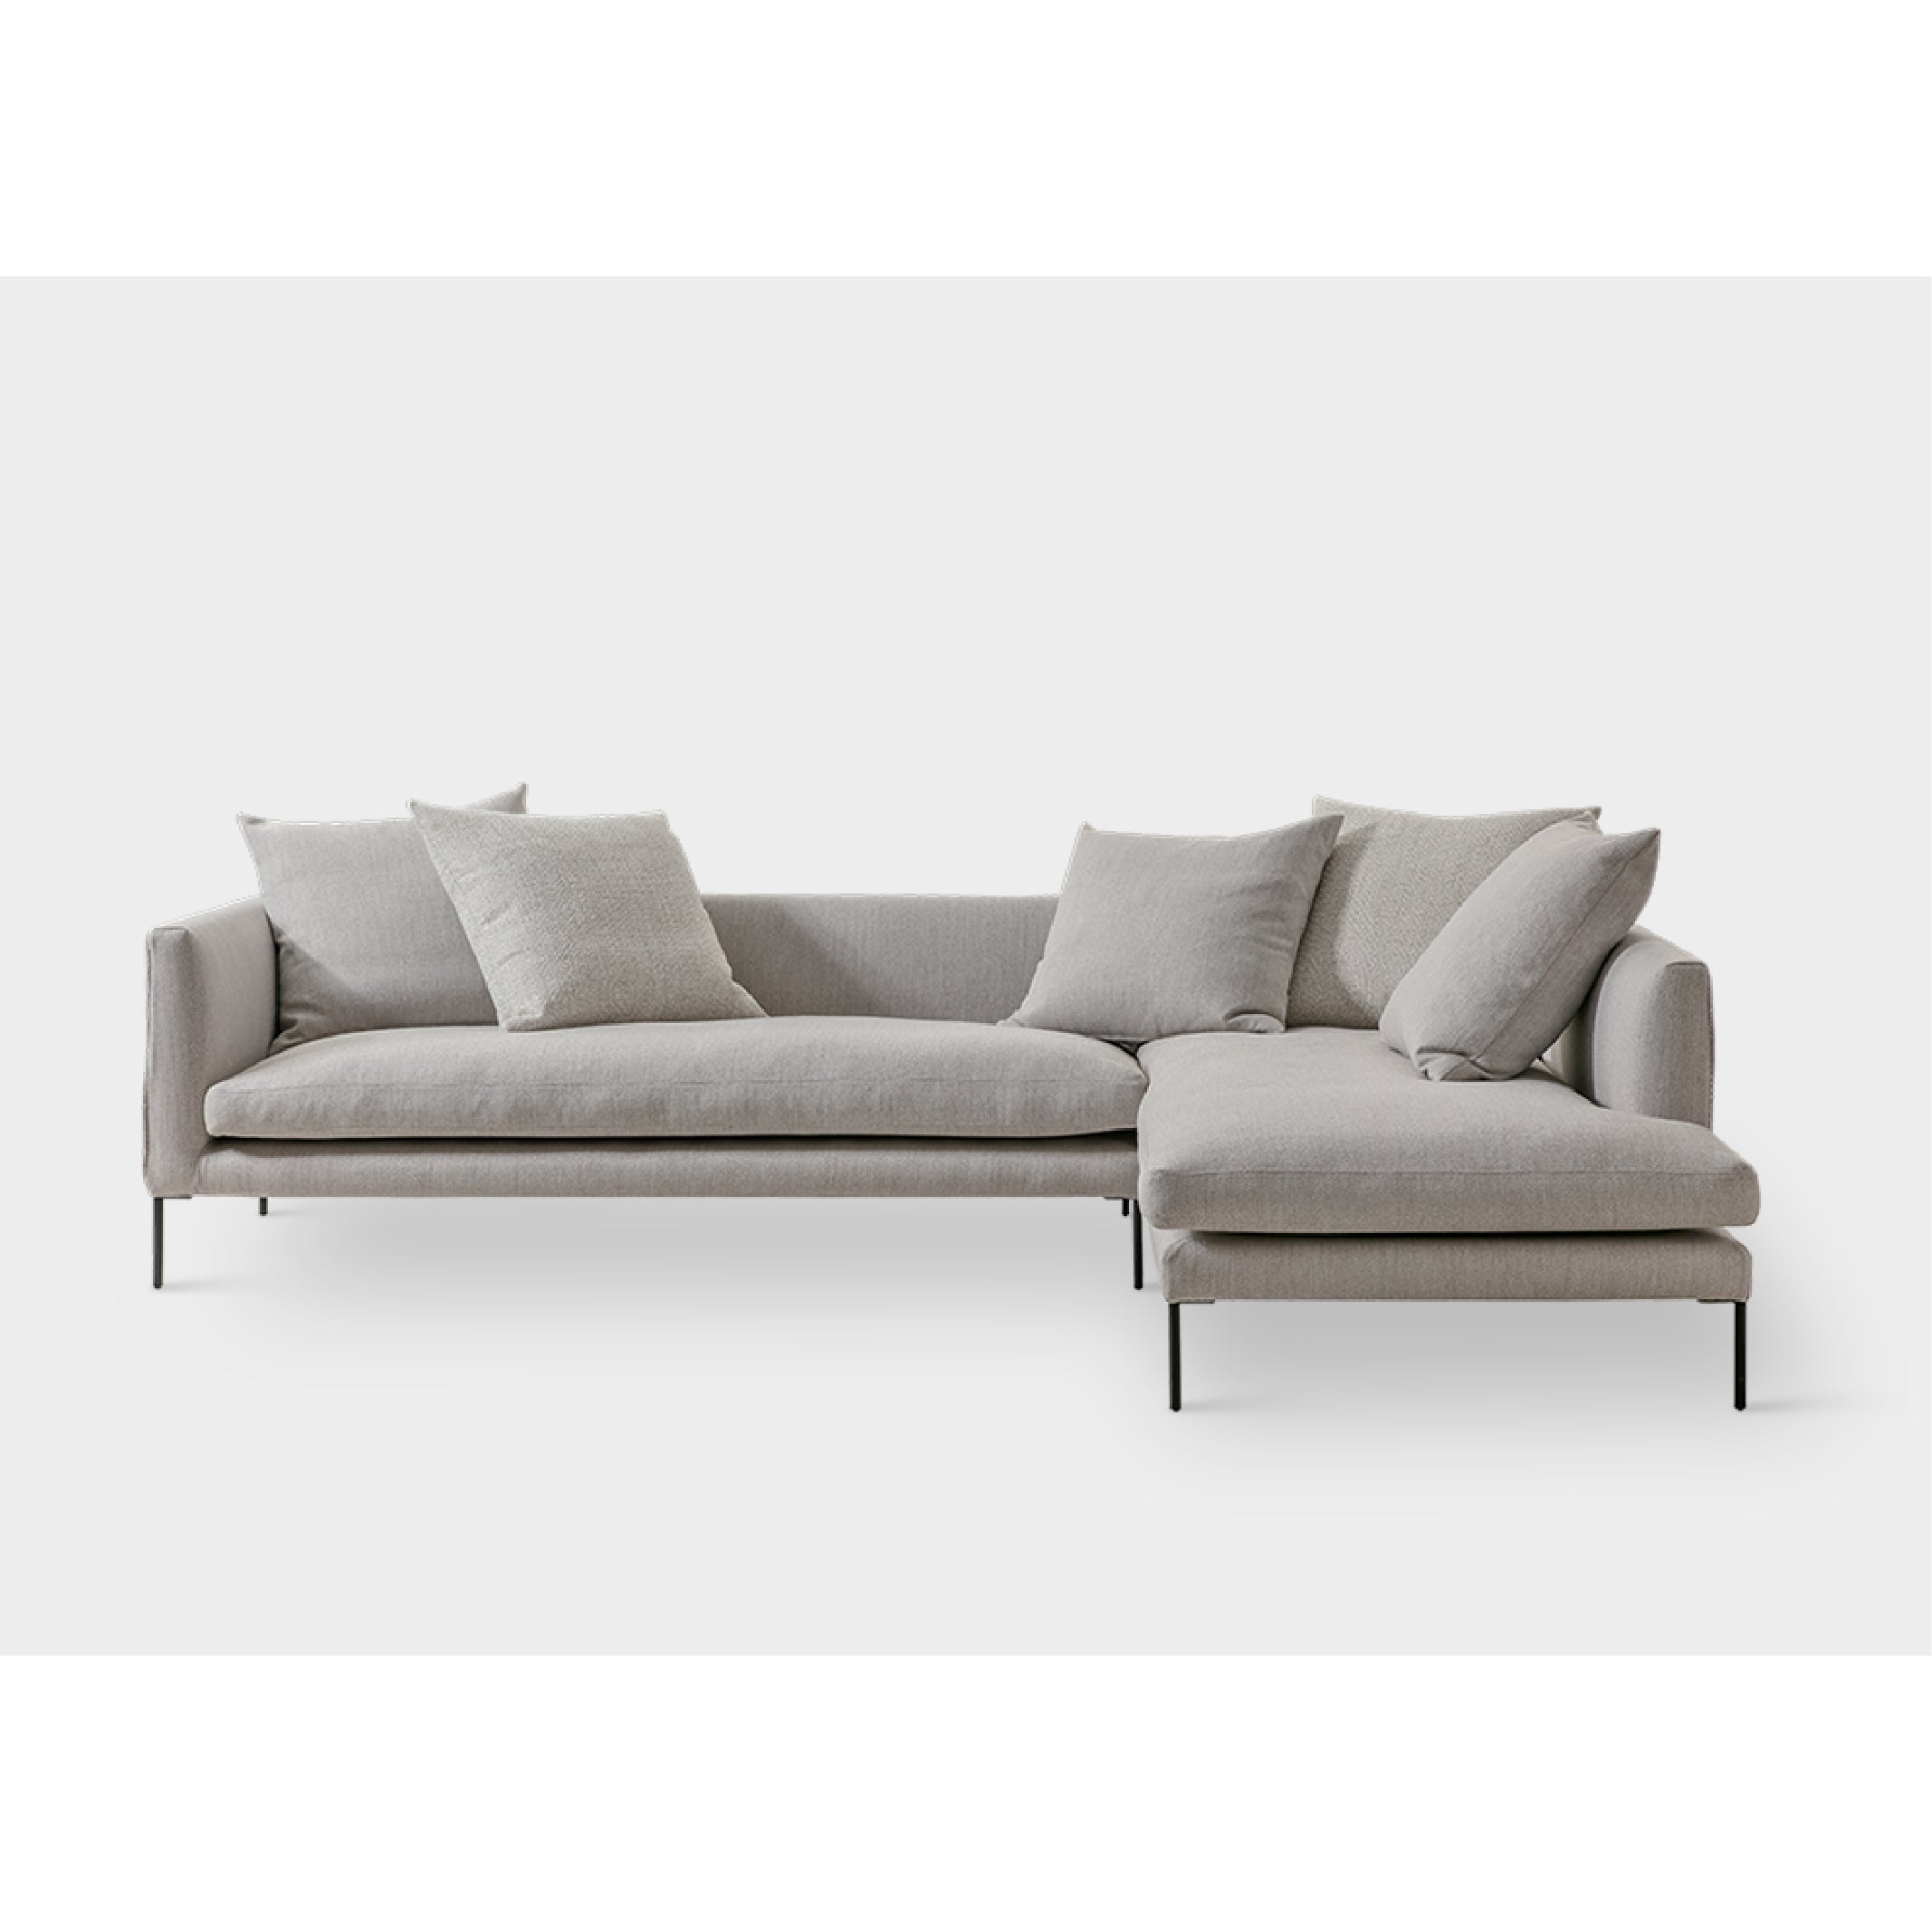 BLADE - 'L' Shape Sofa with Chaise (Right)